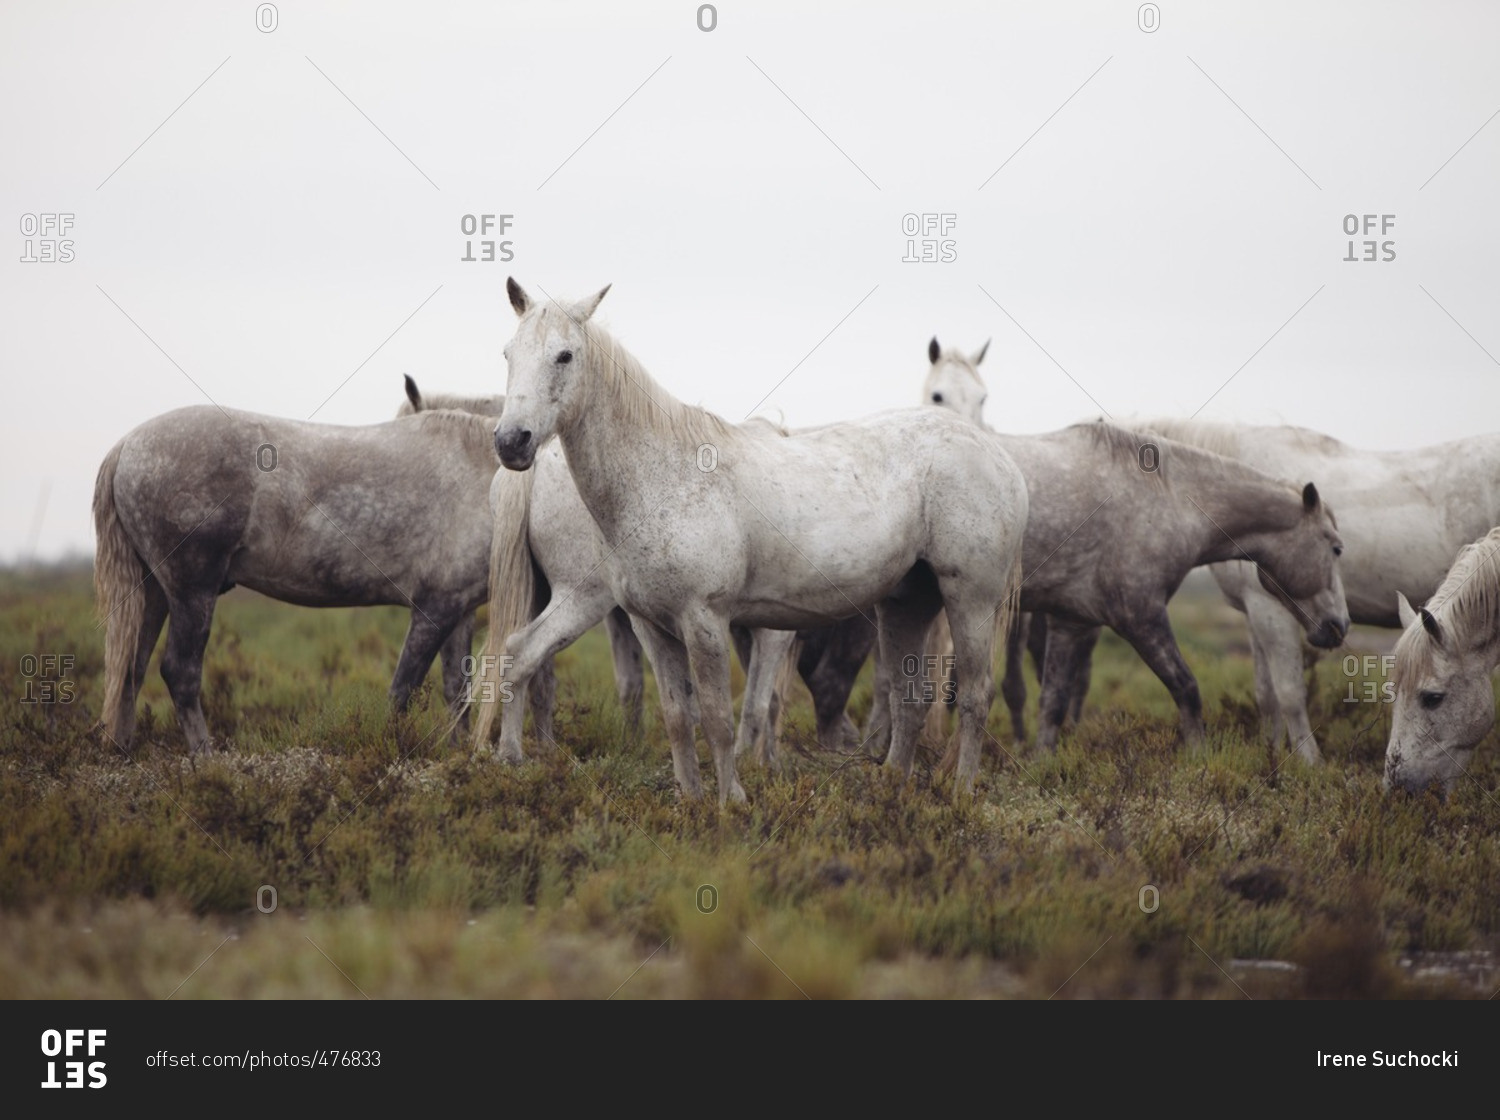 Herd of white horses standing in a field